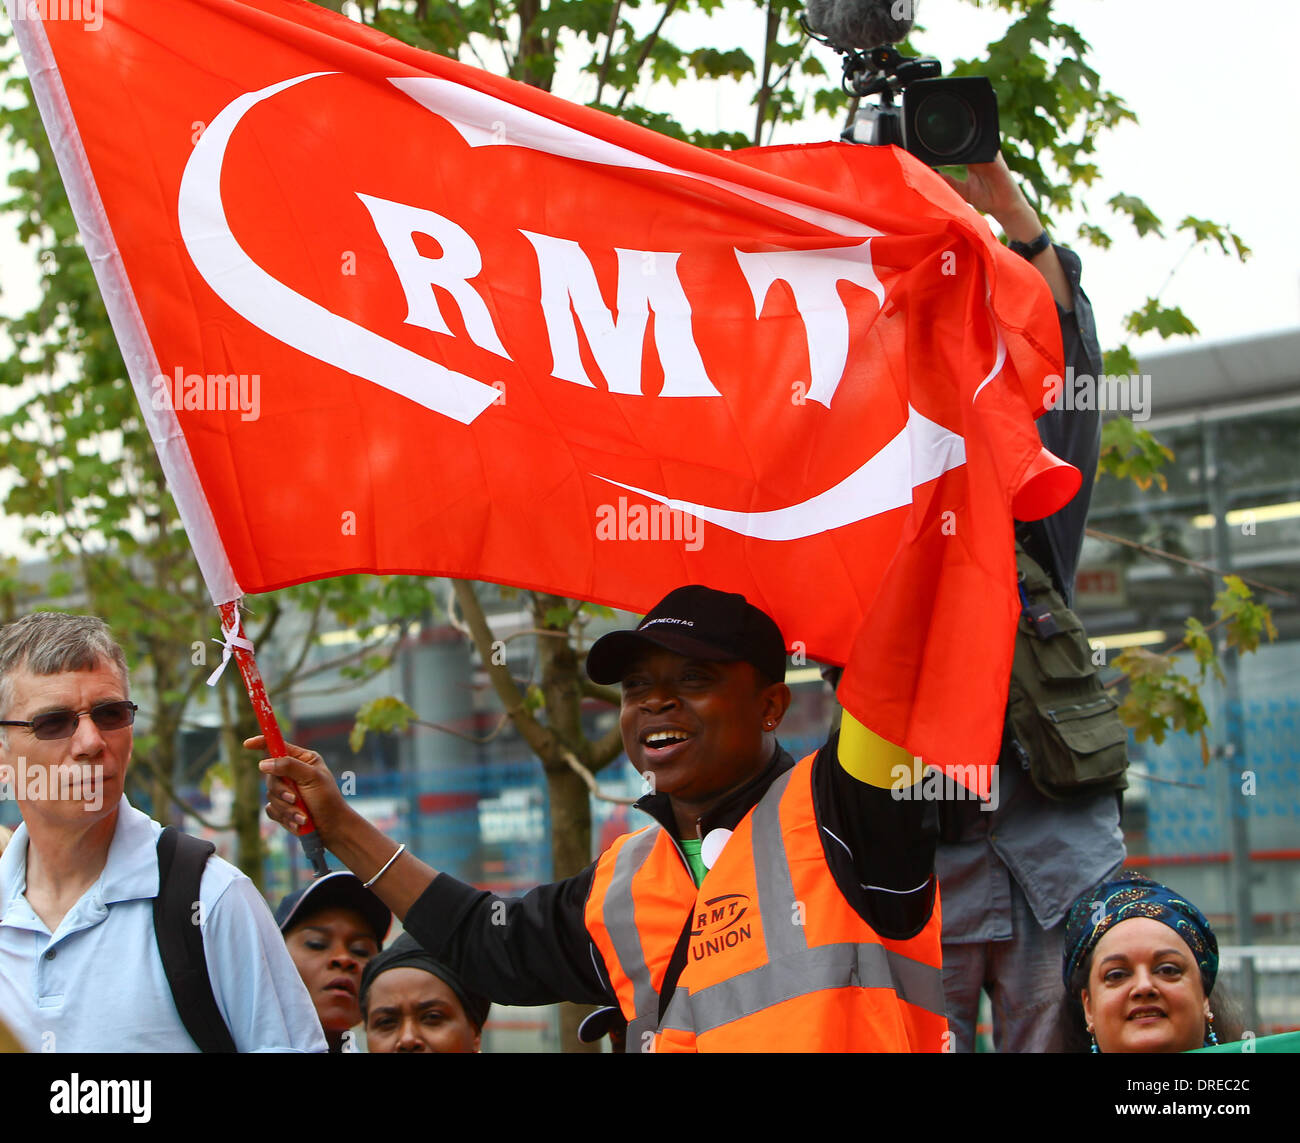 A demonstration by RMT Union tube-cleaners outside Stratford train station beside The Olympic Park London, England - 27.07.12 Stock Photo